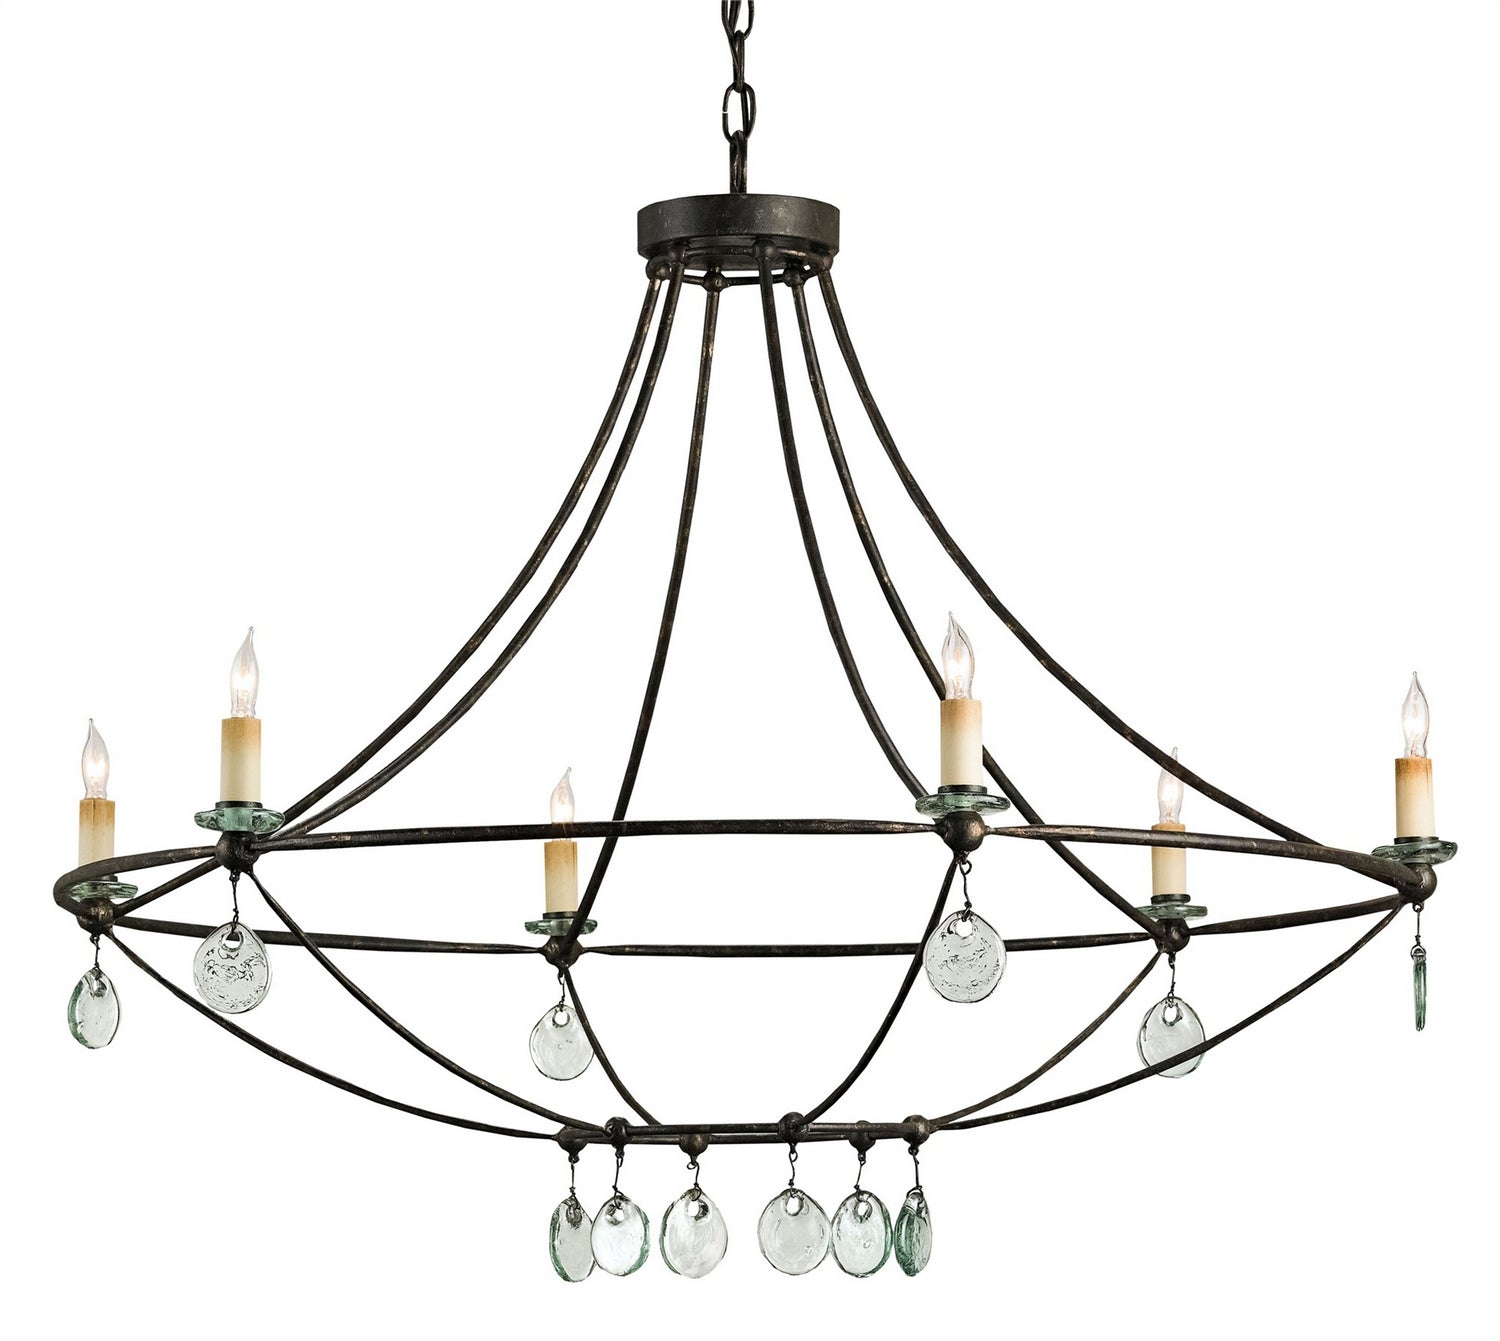 Six Light Chandelier from the Novella collection in Mayfair finish